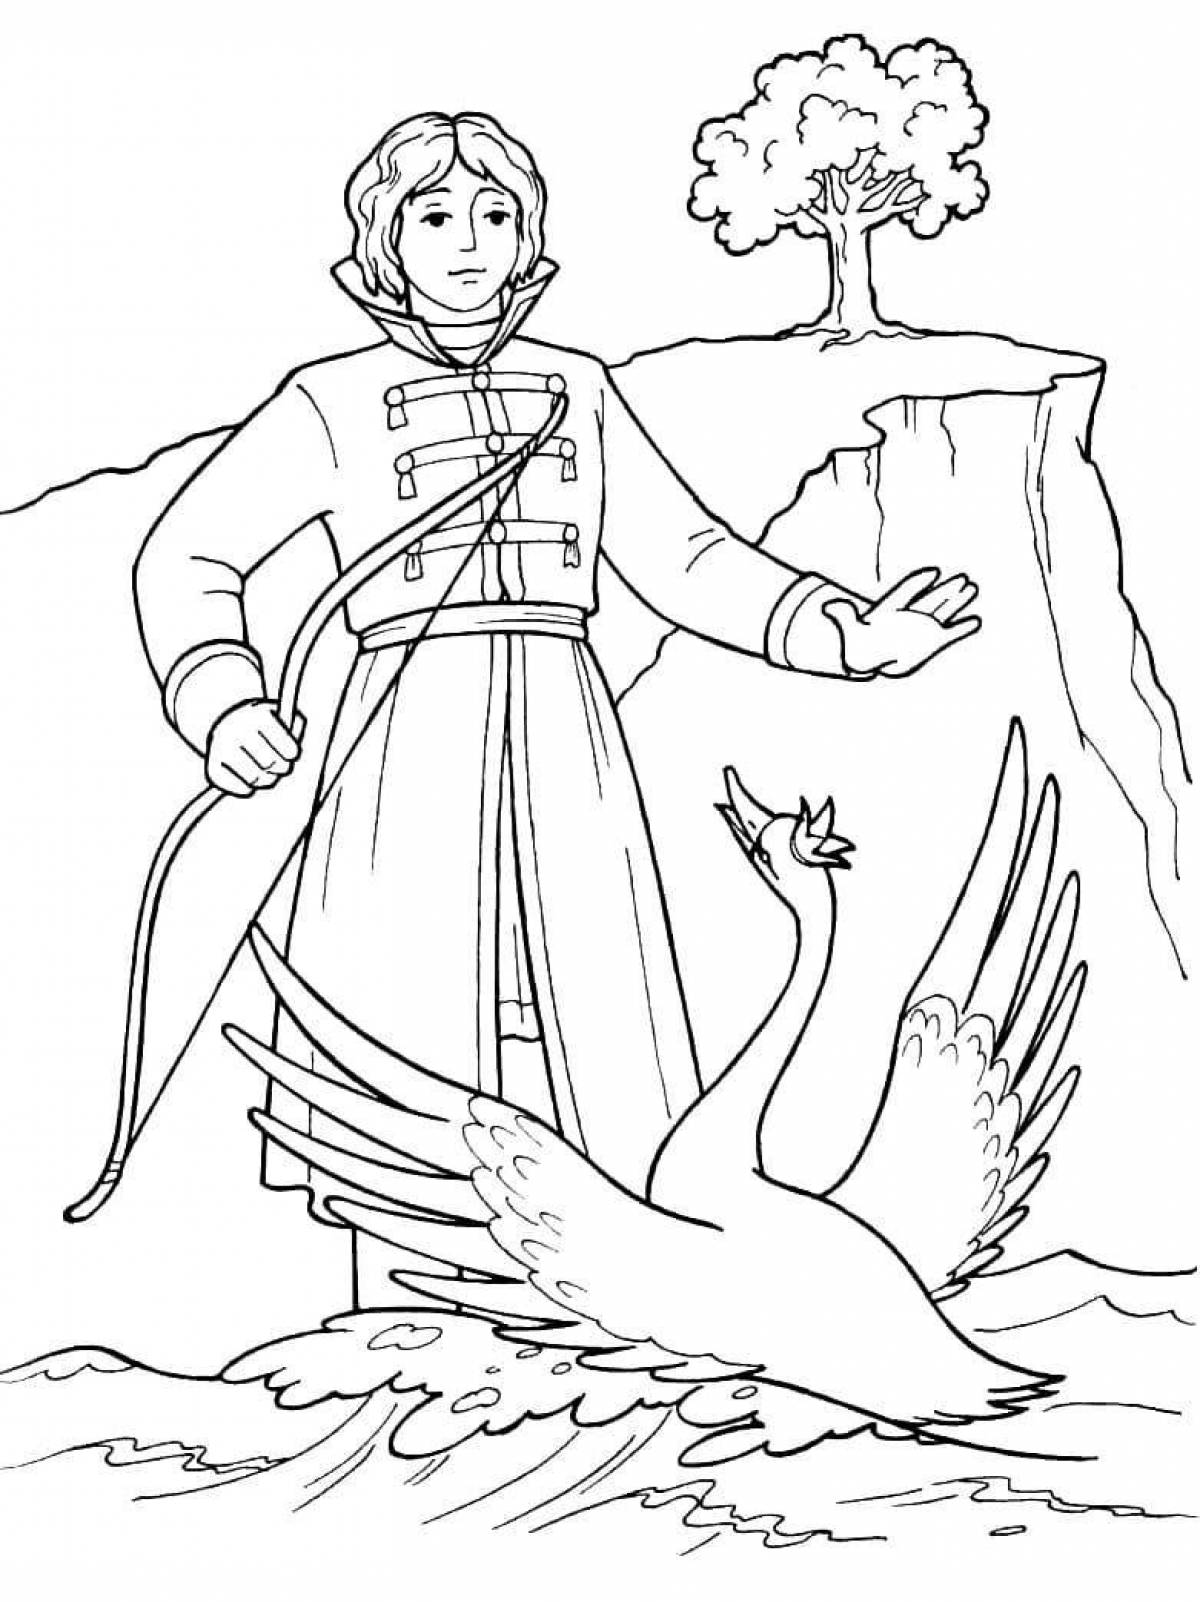 Charming coloring illustration for the tale of Tsar Saltan Grade 3